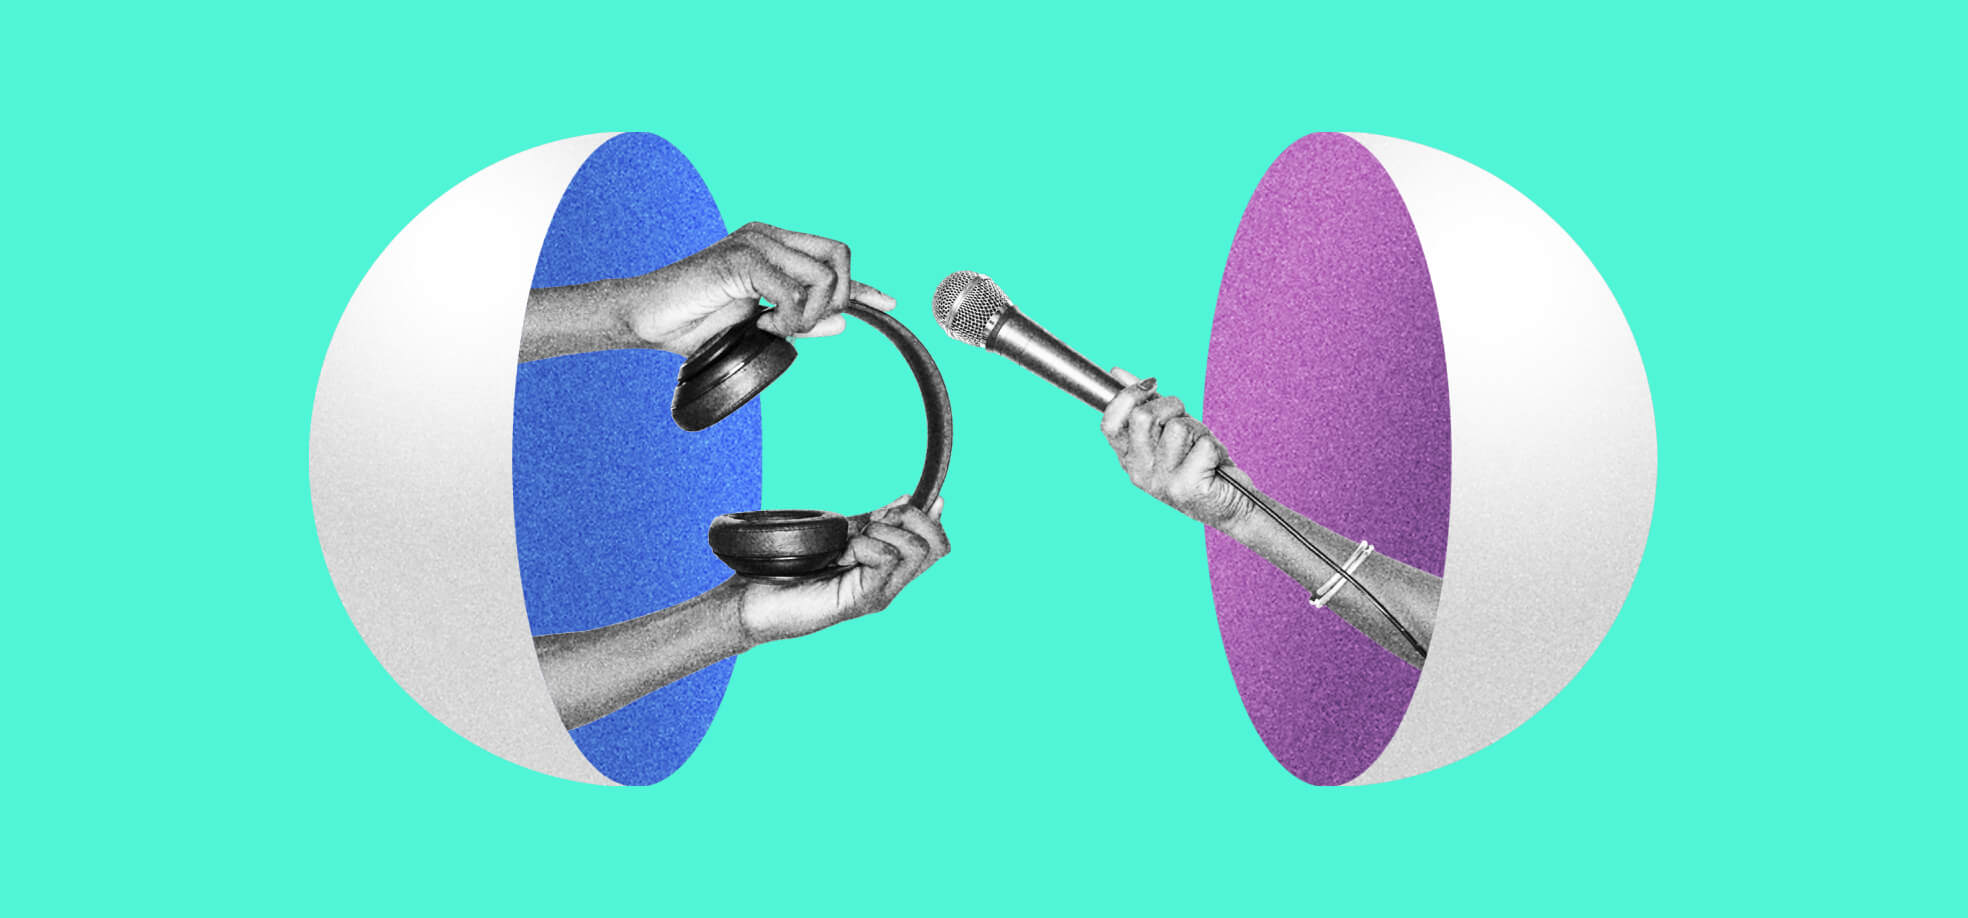 Hands with audio devices from half spheres illustration